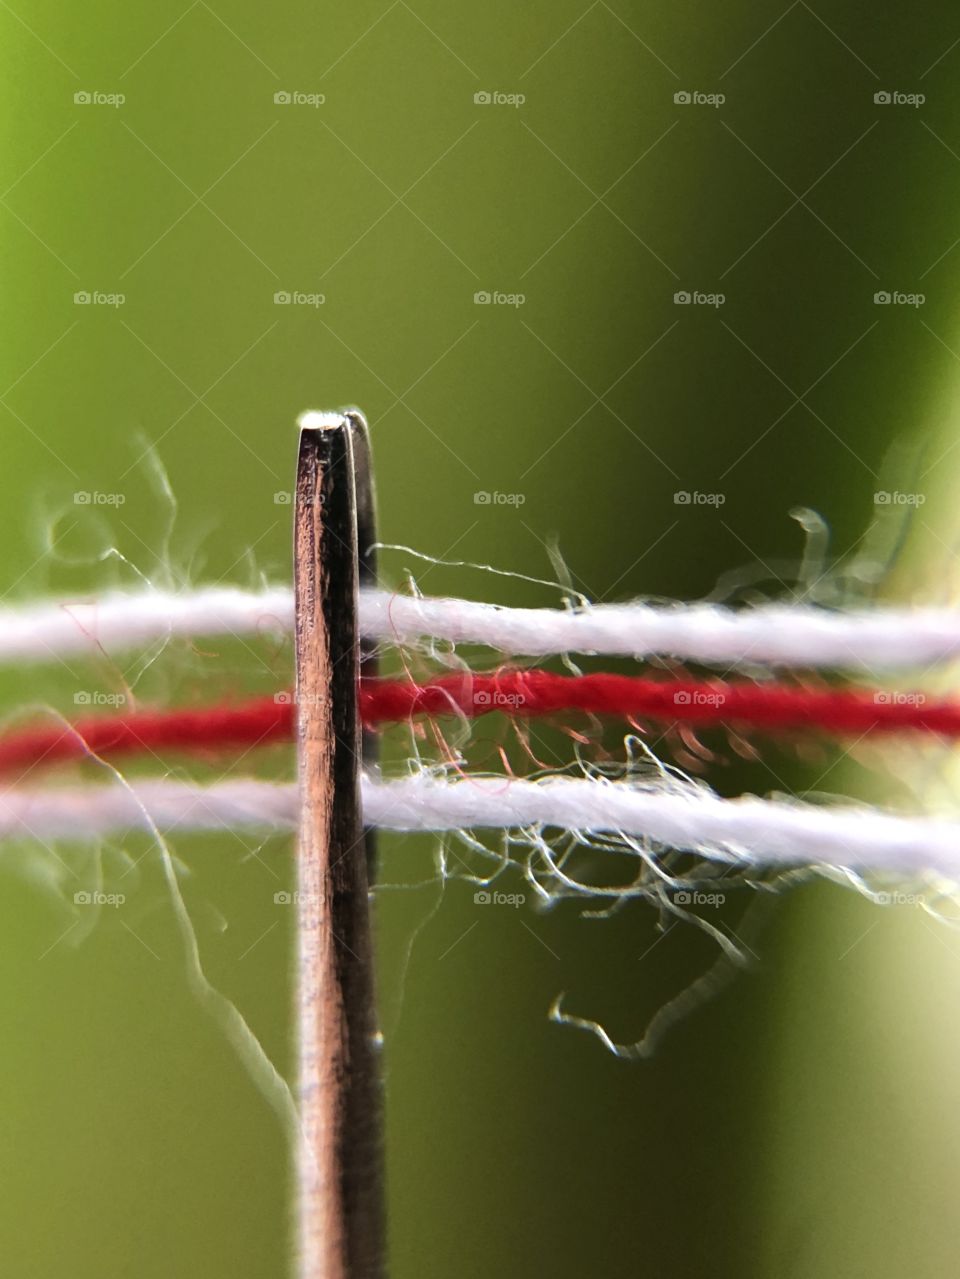 Conceptual macro photo of three threads with colours of historical national Belarusian flag white-red-white, symbolising the struggle against dictatorship in Belarus and power of three: hope, belief and love, threaded through sewing needle